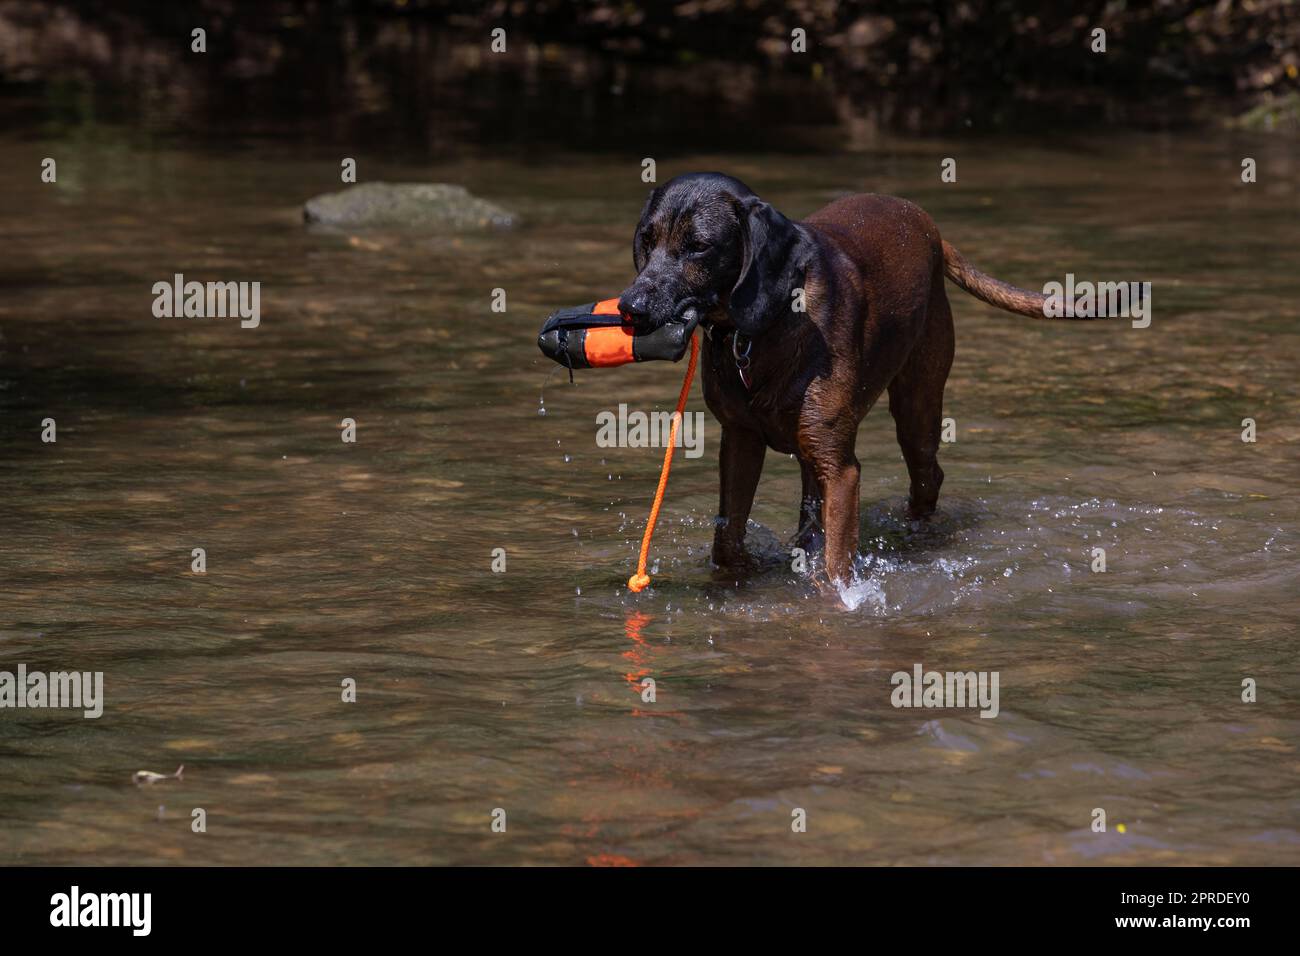 tracker dog fetches toy out of water Stock Photo